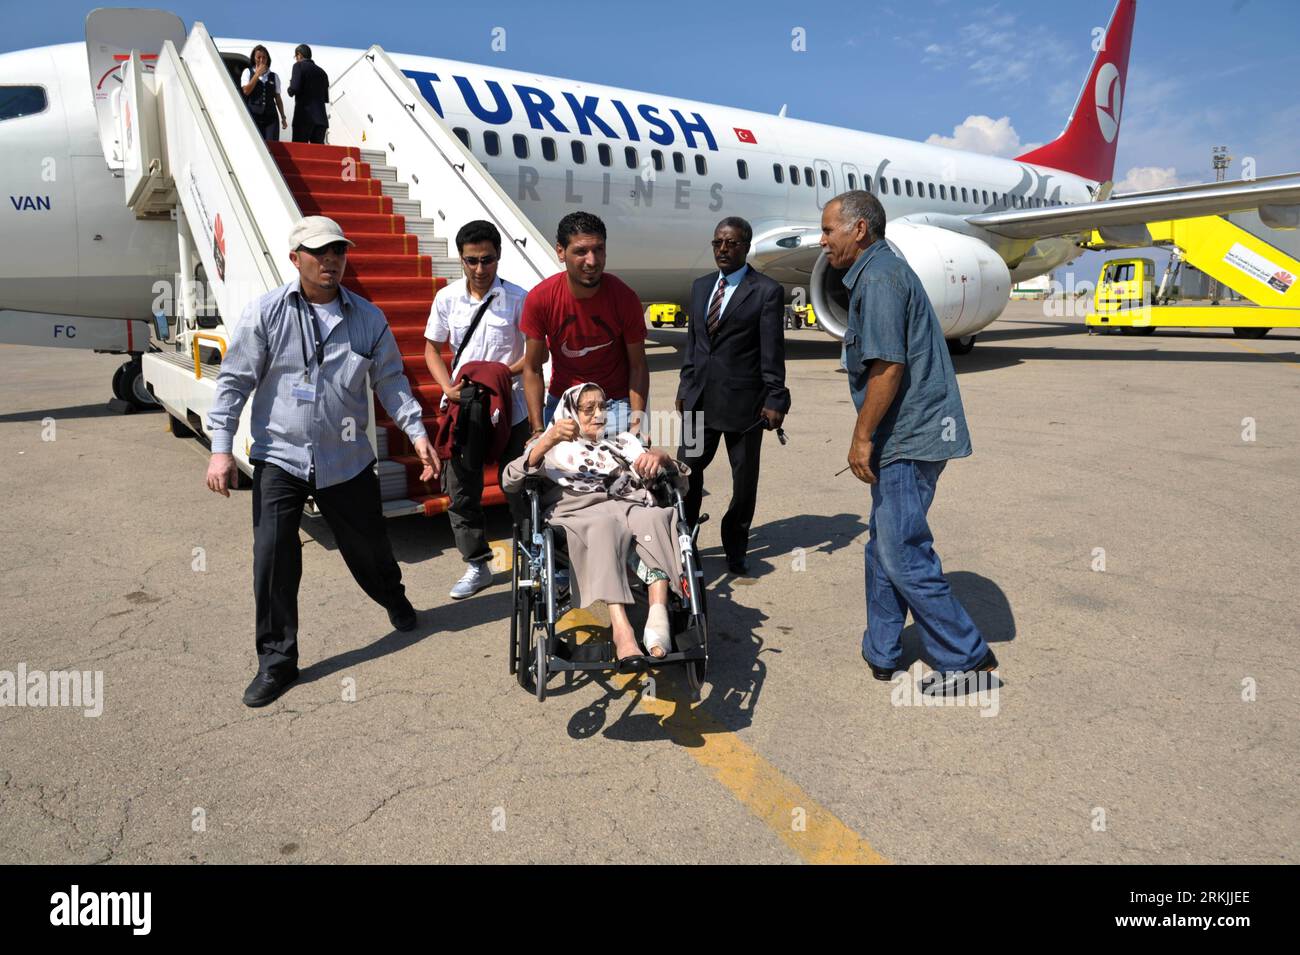 Bildnummer: 56139556  Datum: 01.10.2011  Copyright: imago/Xinhua (111001) -- TRIPOLI, Oct. 1, 2011 (Xinhua) -- An old woman in wheel-chair is carried out from a Turkish Airlines Boeing 737-800 airplane at Mitiga Airport in Tripoli, Libya, Oct. 1, 2011. The airplane, with 43 passengers on board, is the first flight from Istanbul to Tripoli since Feb. 28, 2011. (Xinhua/Li Muzi) LIBYA-TRIPOLI-TURKEY-AIRLINES PUBLICATIONxNOTxINxCHN Wirtschaft Fluglinie Airline Turkish Airlines Reisende Symbolfoto Flugzeug Luftfahrt xdp x0x 2011 quer premiumd      56139556 Date 01 10 2011 Copyright Imago XINHUA  Tr Stock Photo